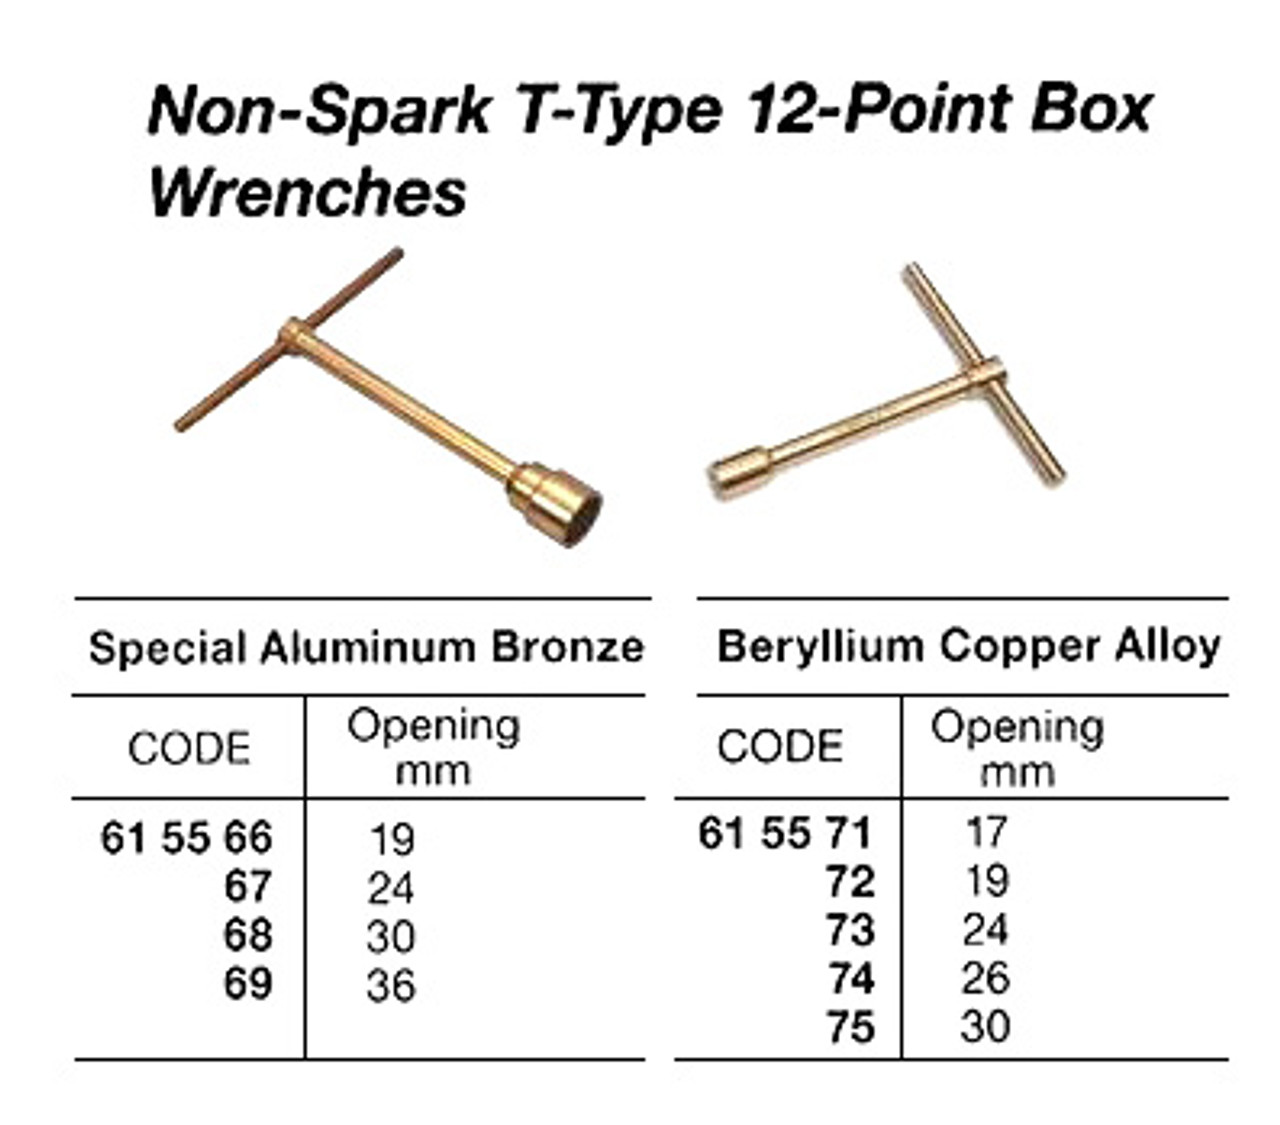 IMPA 615573 WRENCH SOCKET WITH T-HANDLE 24mm ALU-BRONZE NON-SPARK